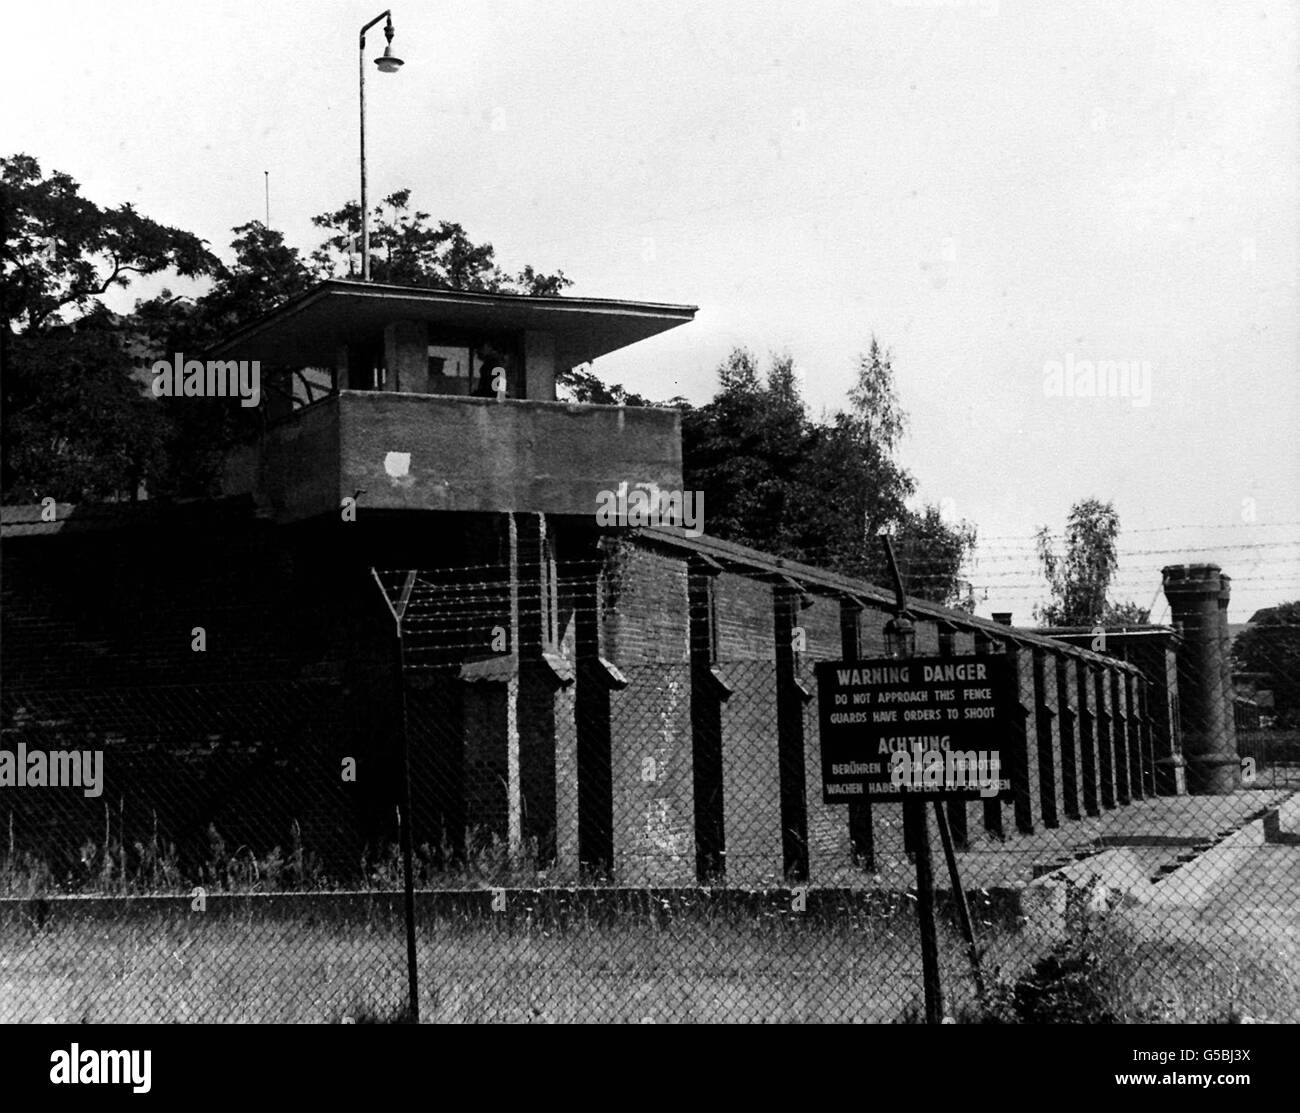 SPANDAU PRISON 1984: One of the six watchtowers which are placed around Spandau Prison in the British sector of West Berlin, Germany. The prison is home to Adolf Hitler's former Deputy, Rudolf Hess. Stock Photo